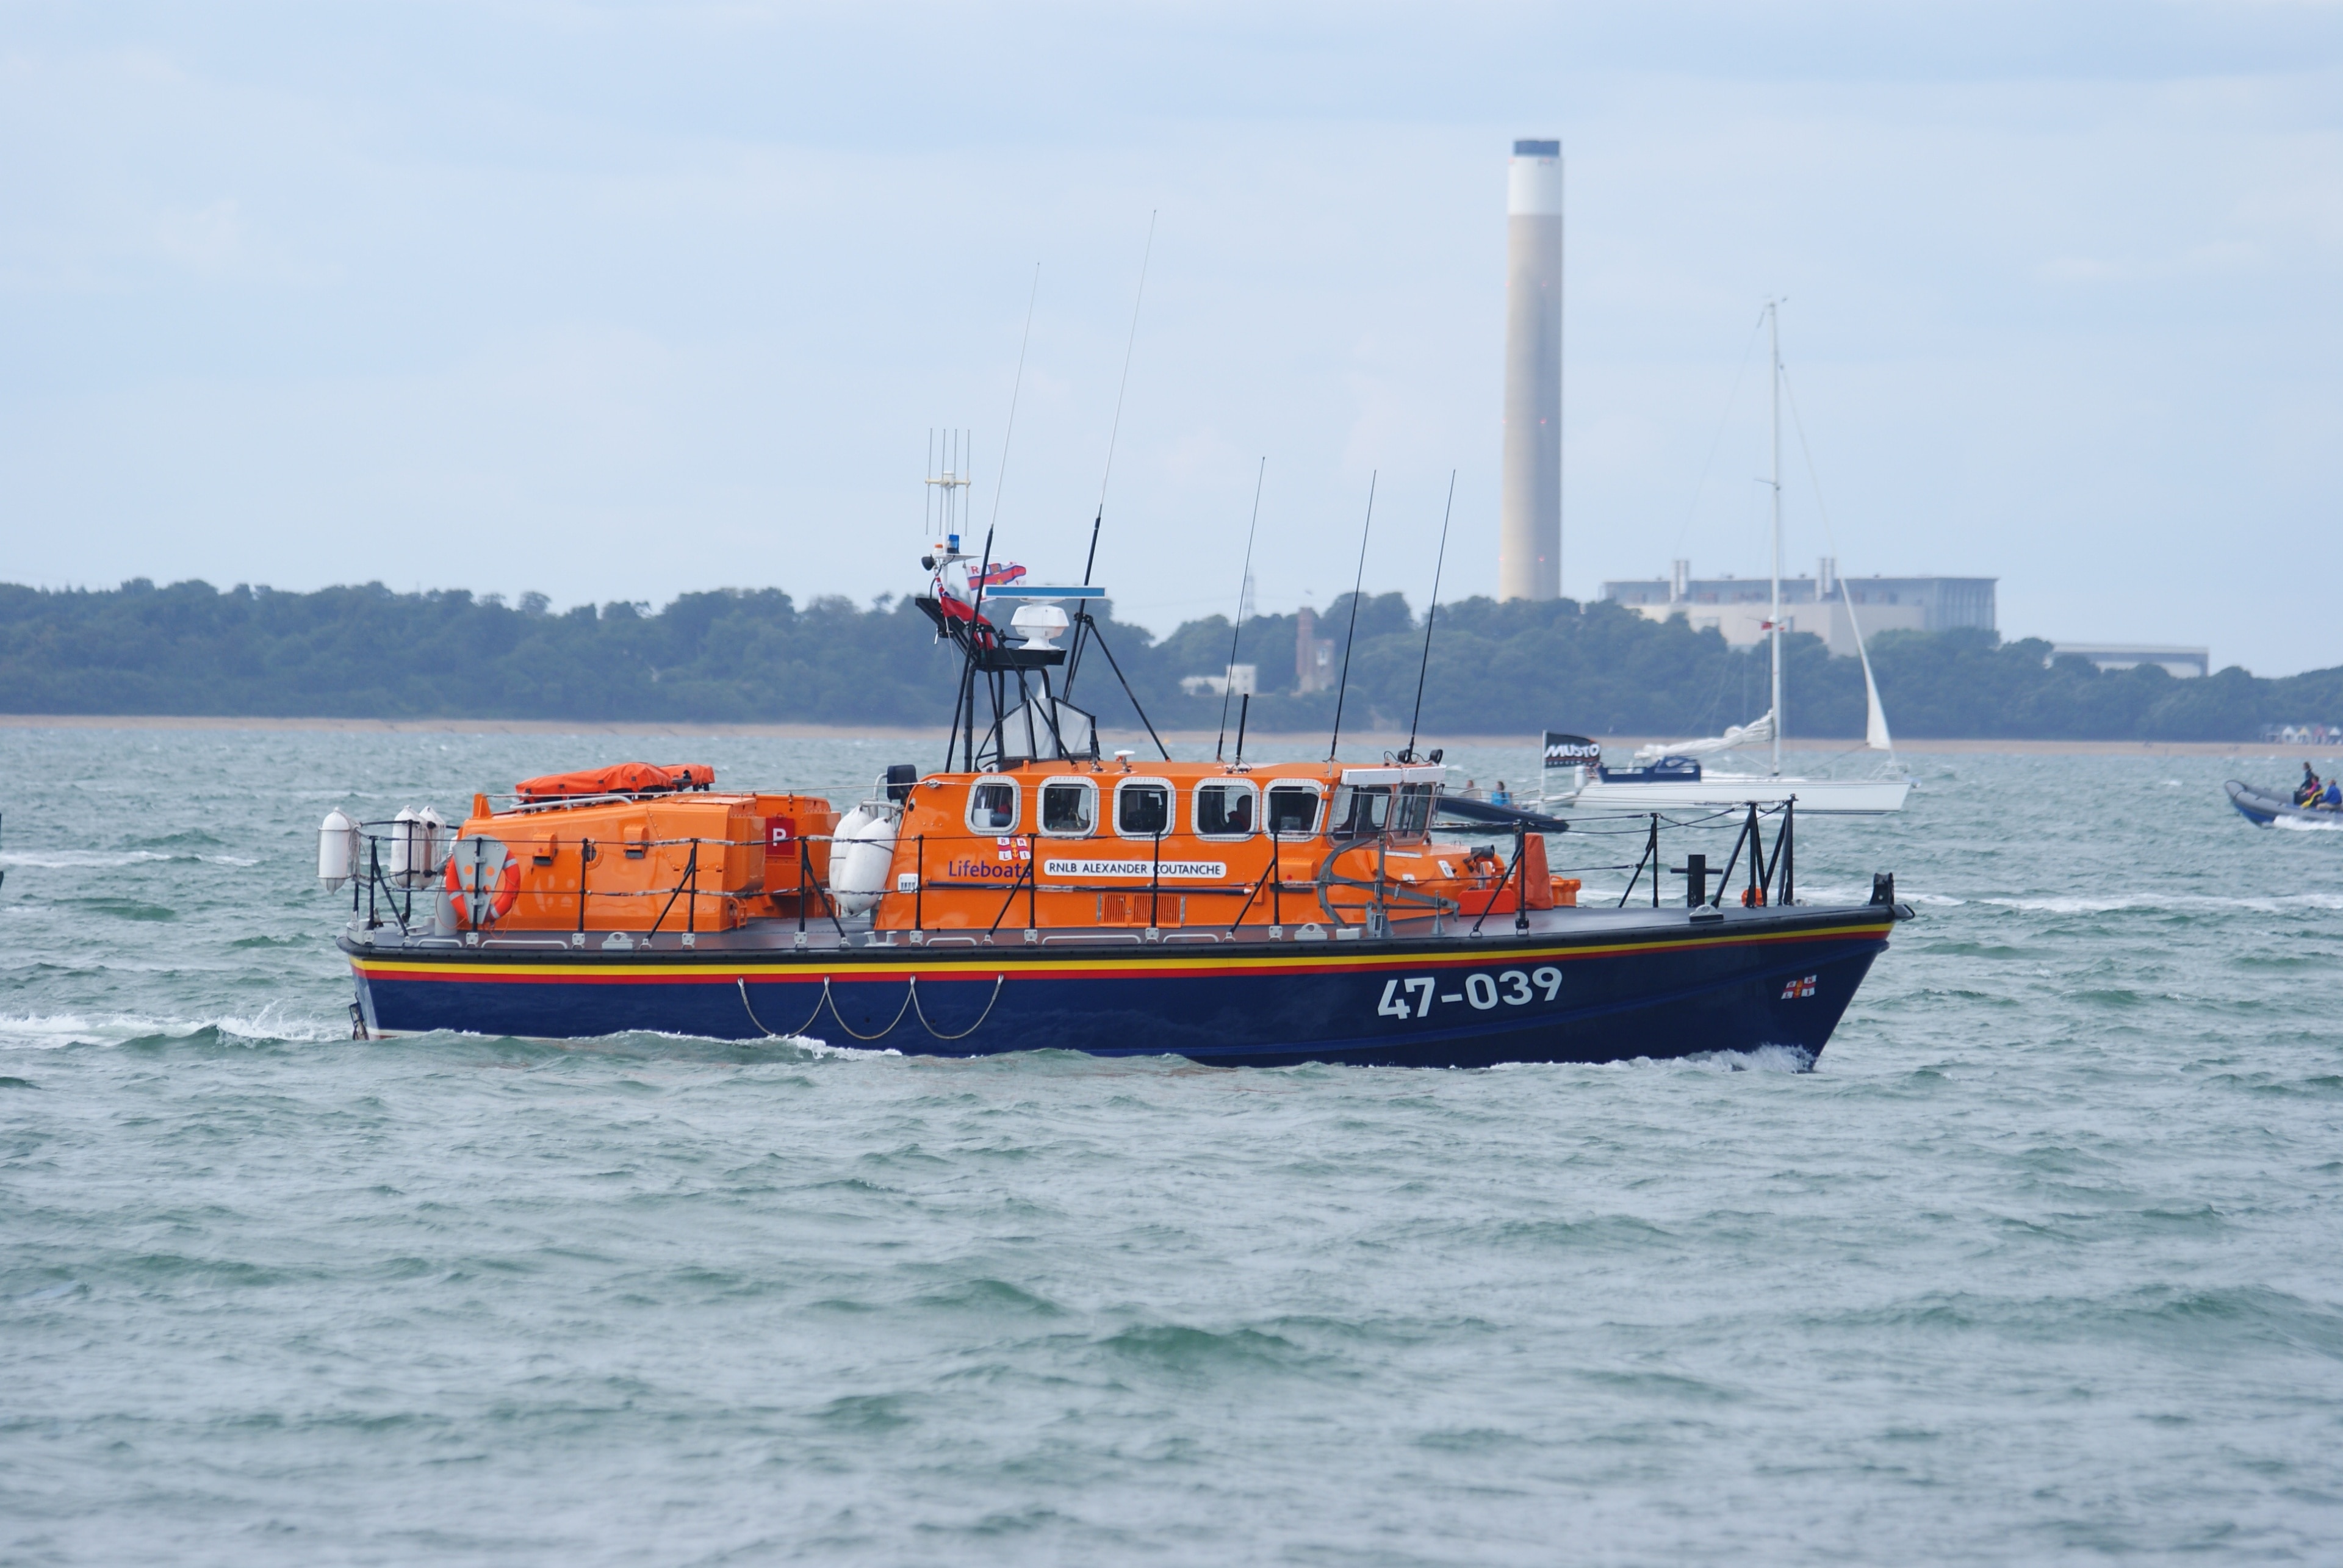 The Calshot Tyne-class lifeboat RNLB Alexander Coutanche (ON 1157)